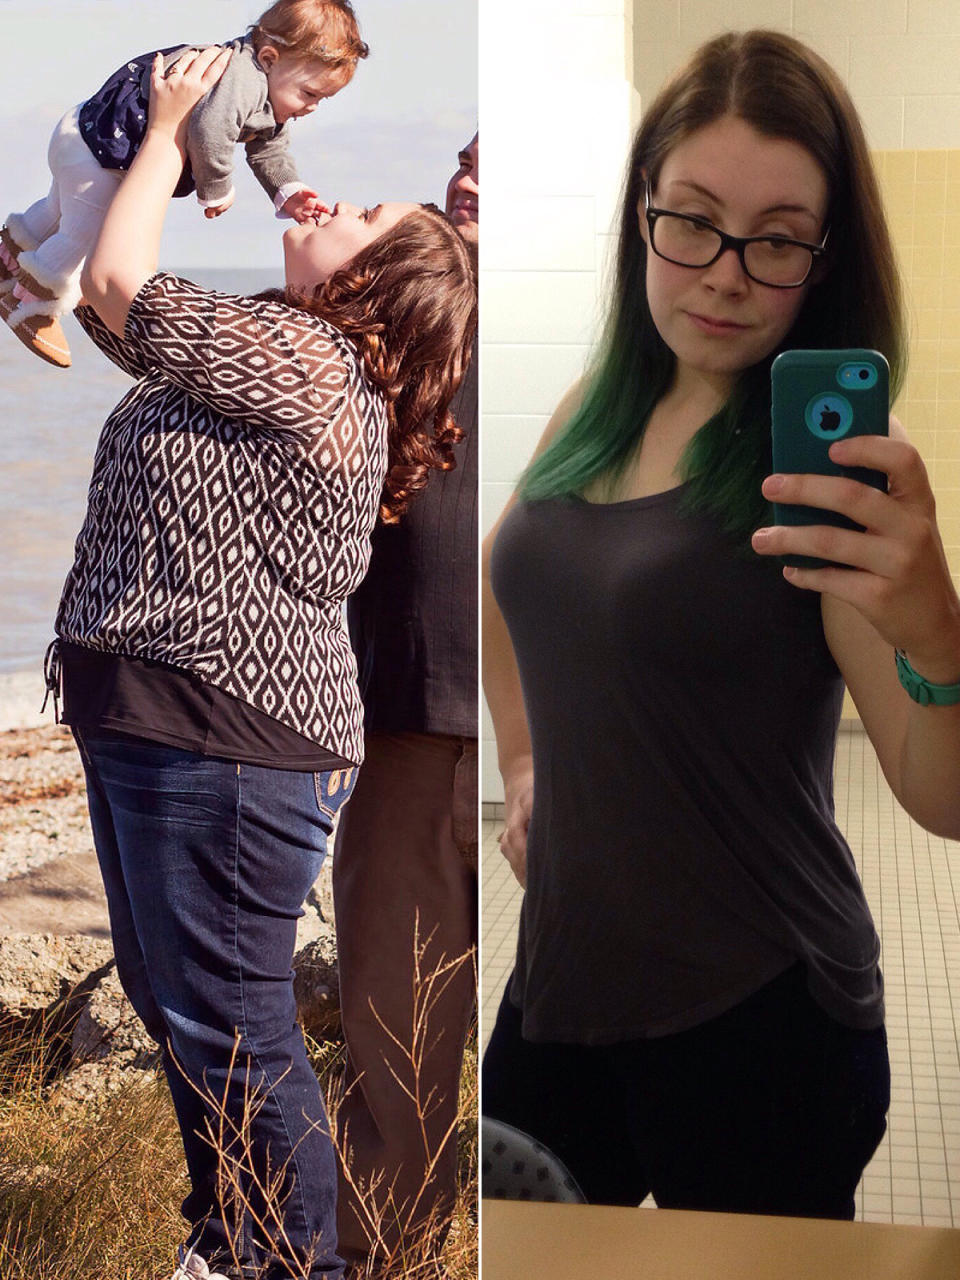 Emily Powers: Lost 120 Lbs.